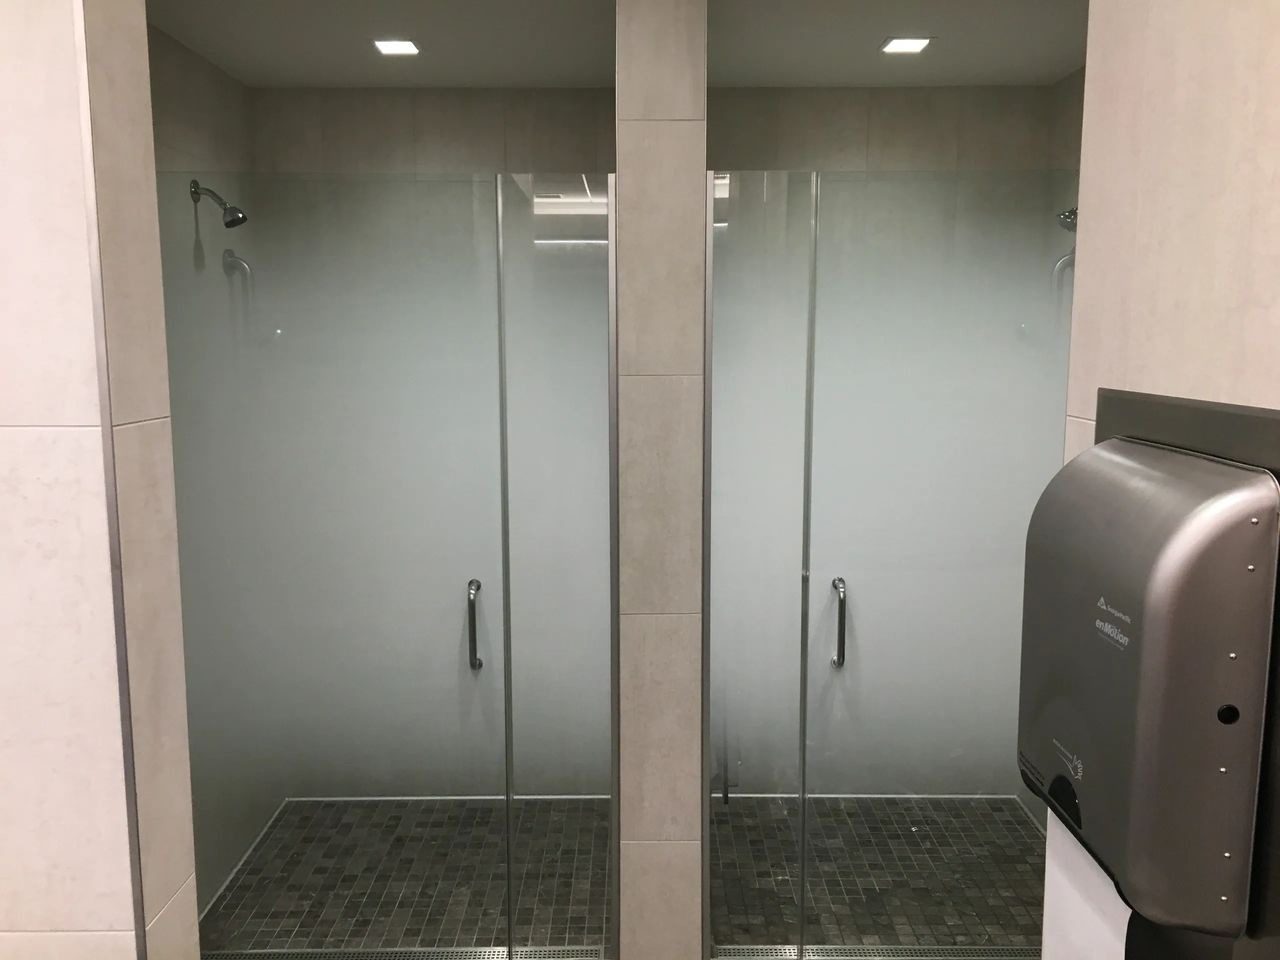 A bathroom with two glass shower doors and a sink.